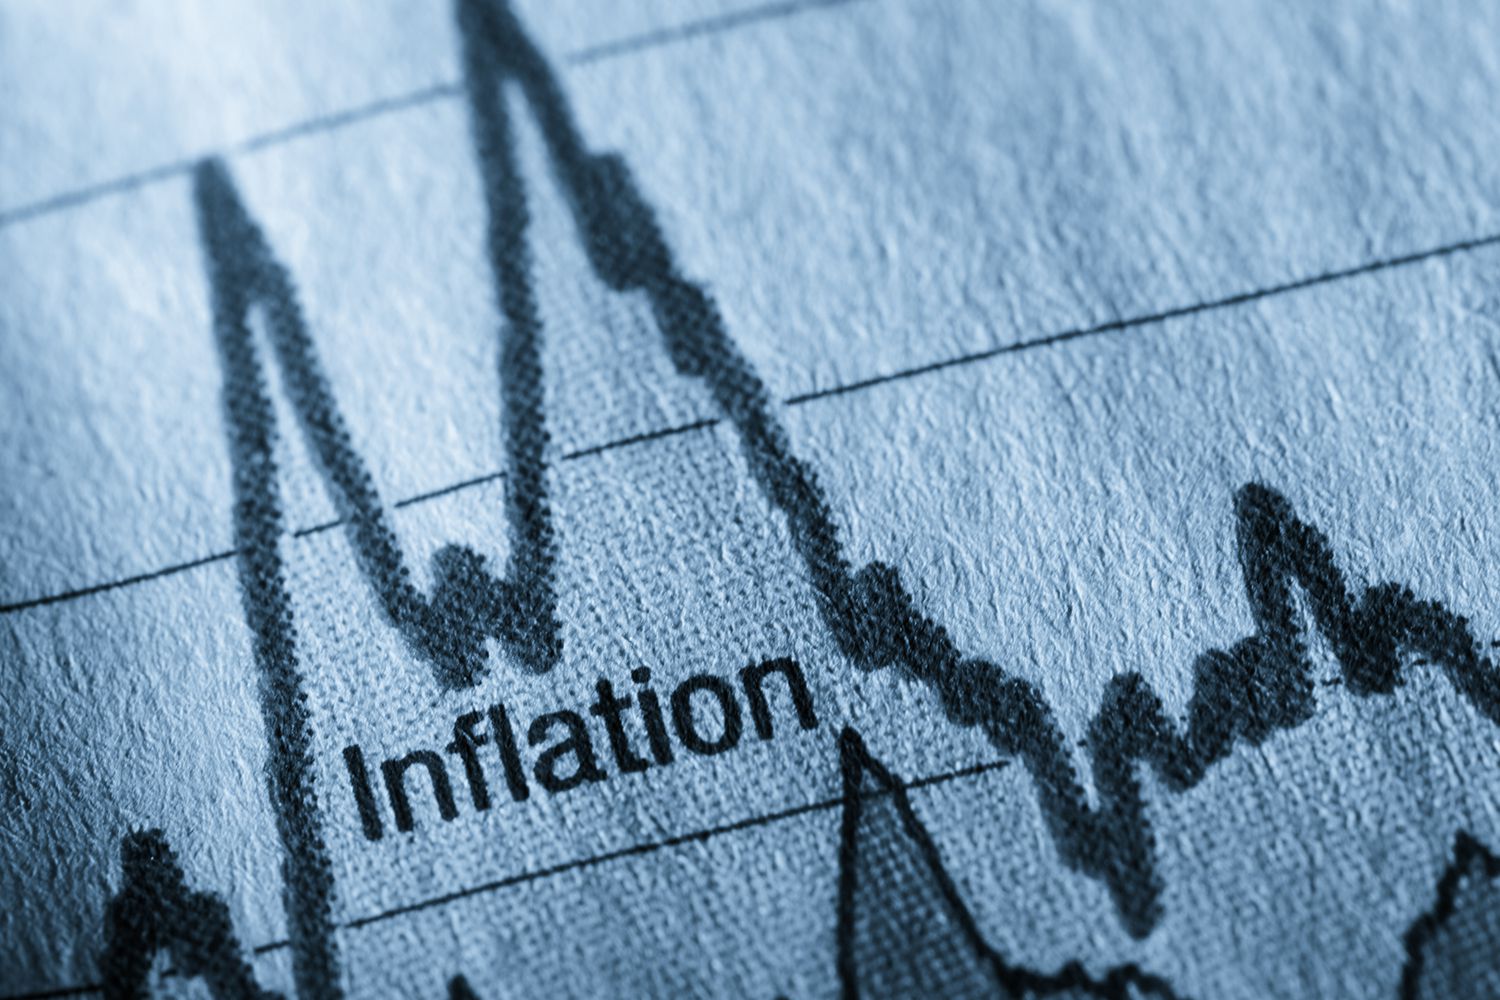 Effects of Inflation on real estate in Africa